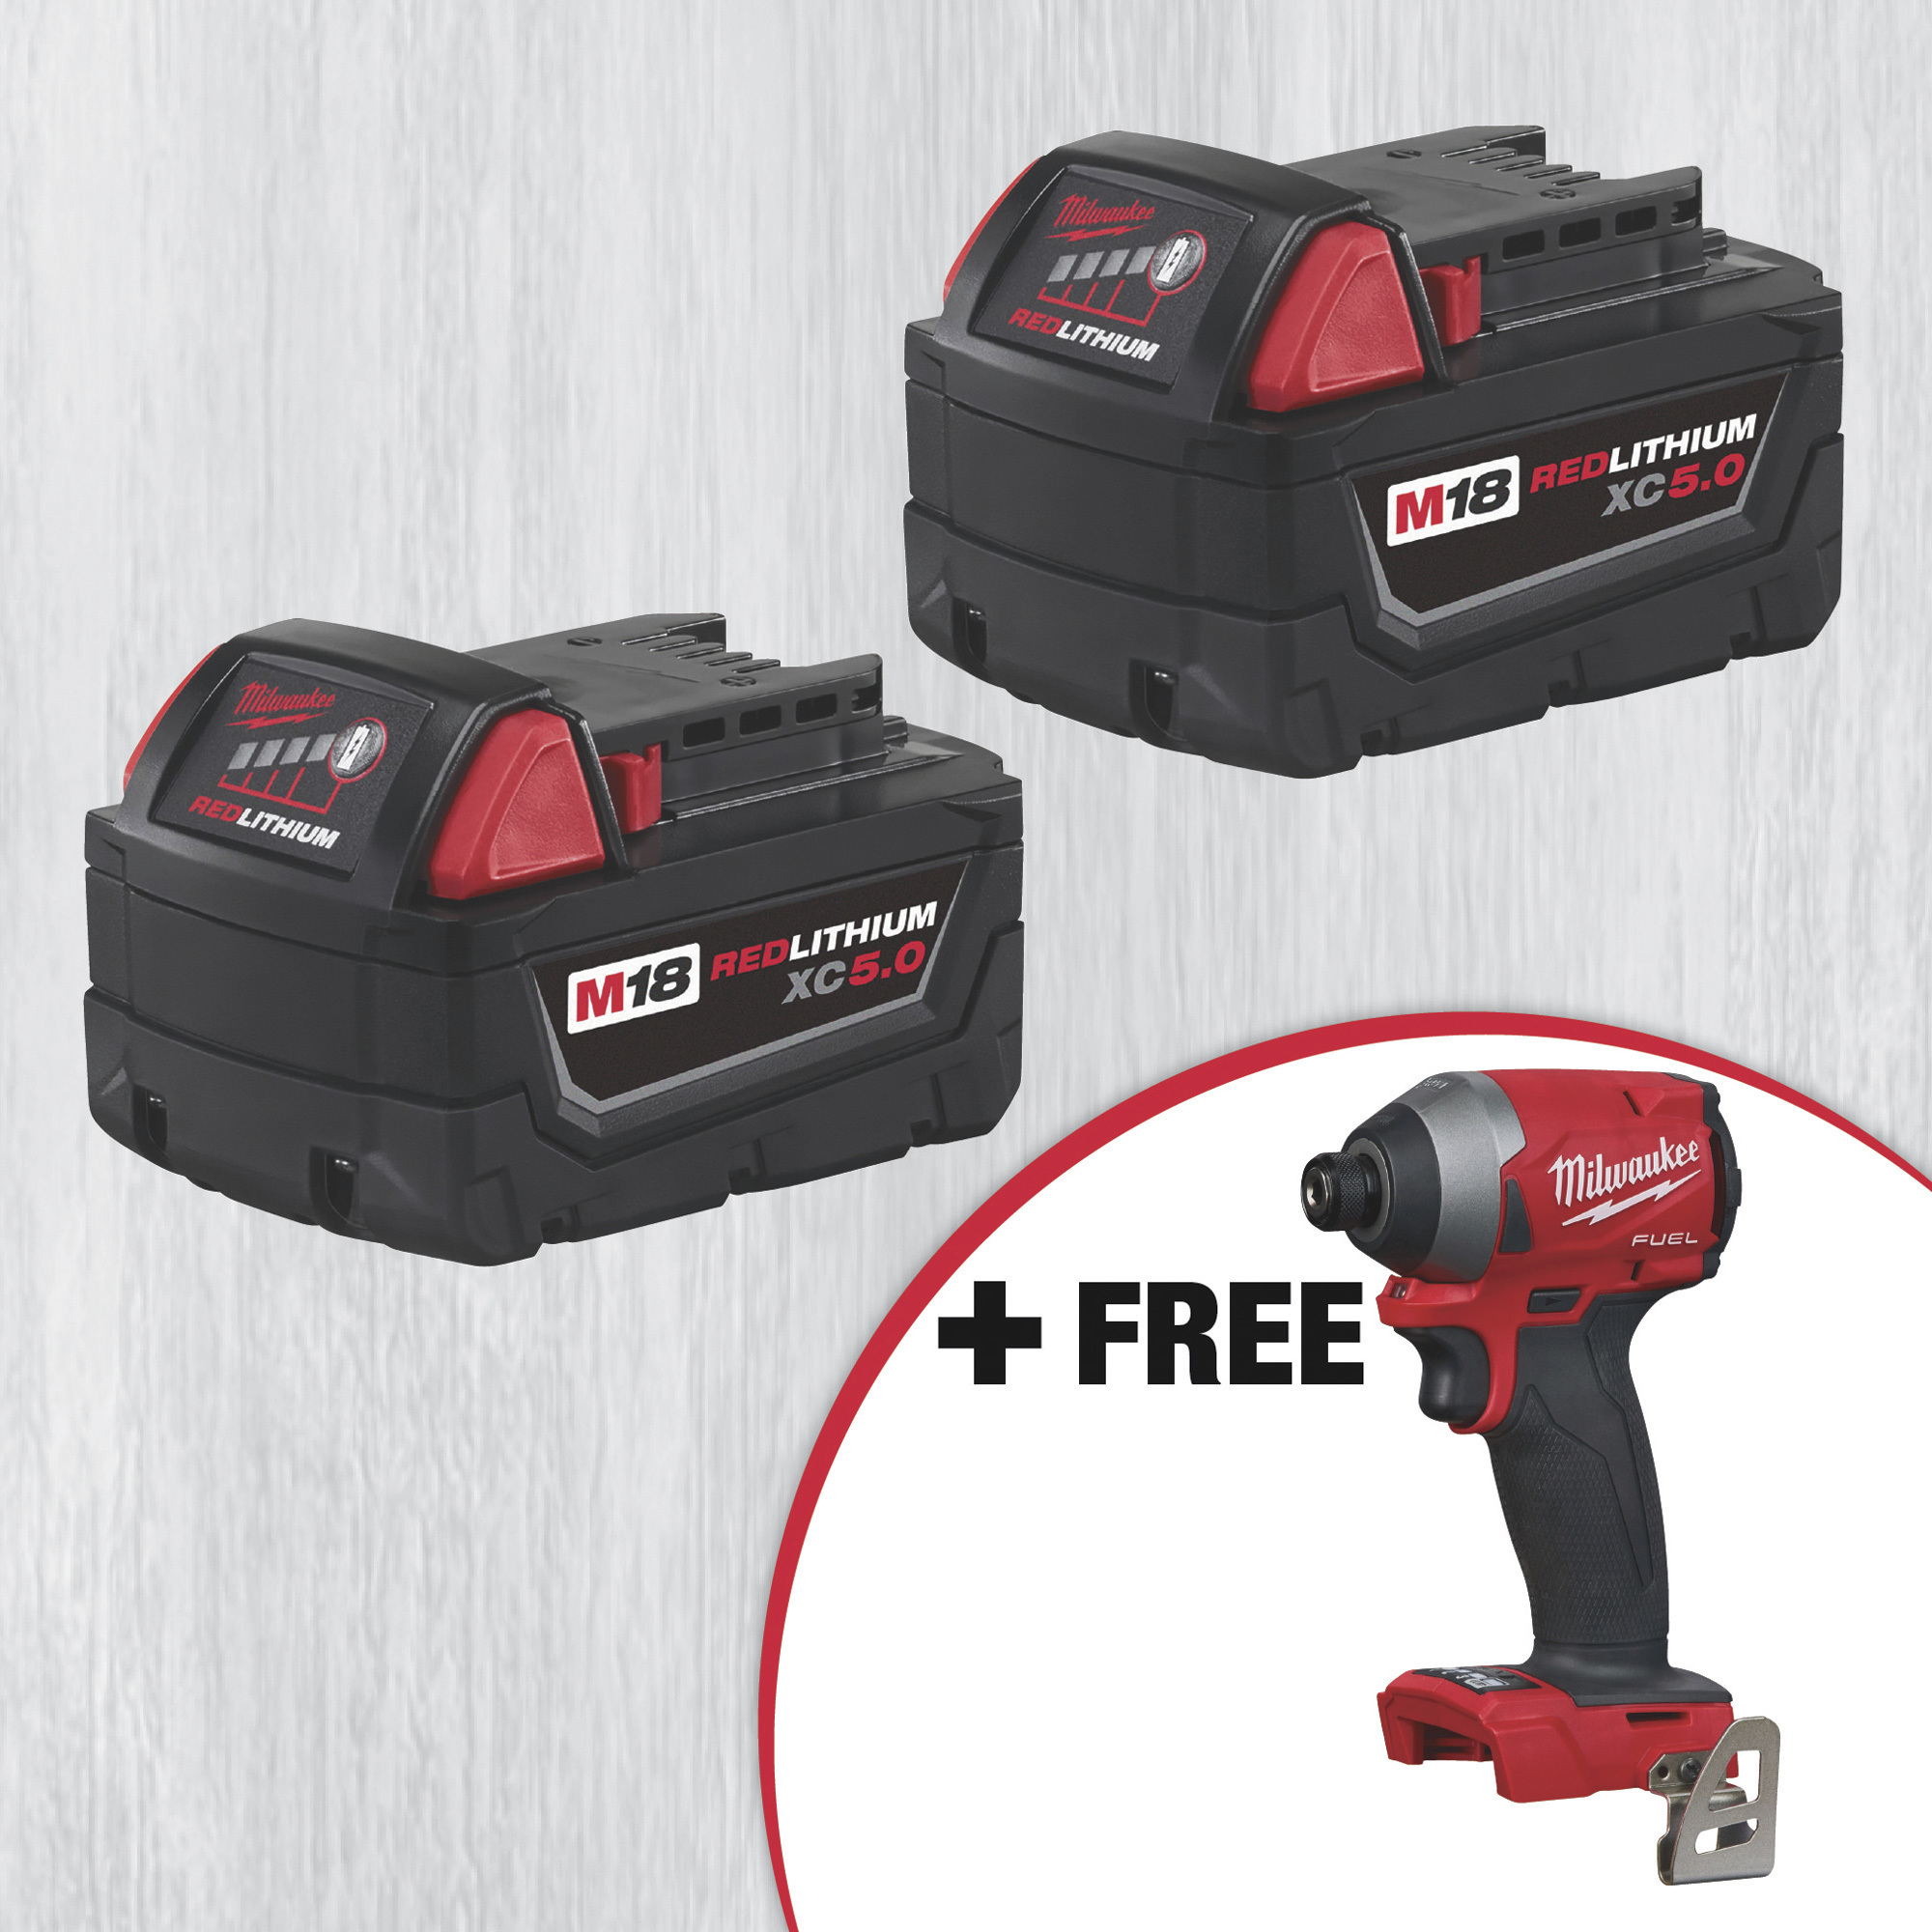 SPECIAL BUY! Milwaukee M18 REDLITHIUM XC 5.0 Extended Capacity Battery  2-Pack with FREE M18 FUEL(tm) Cordless 1/2in. Hammer Drill/Driver, Model#  48-11-1852BSE22P2